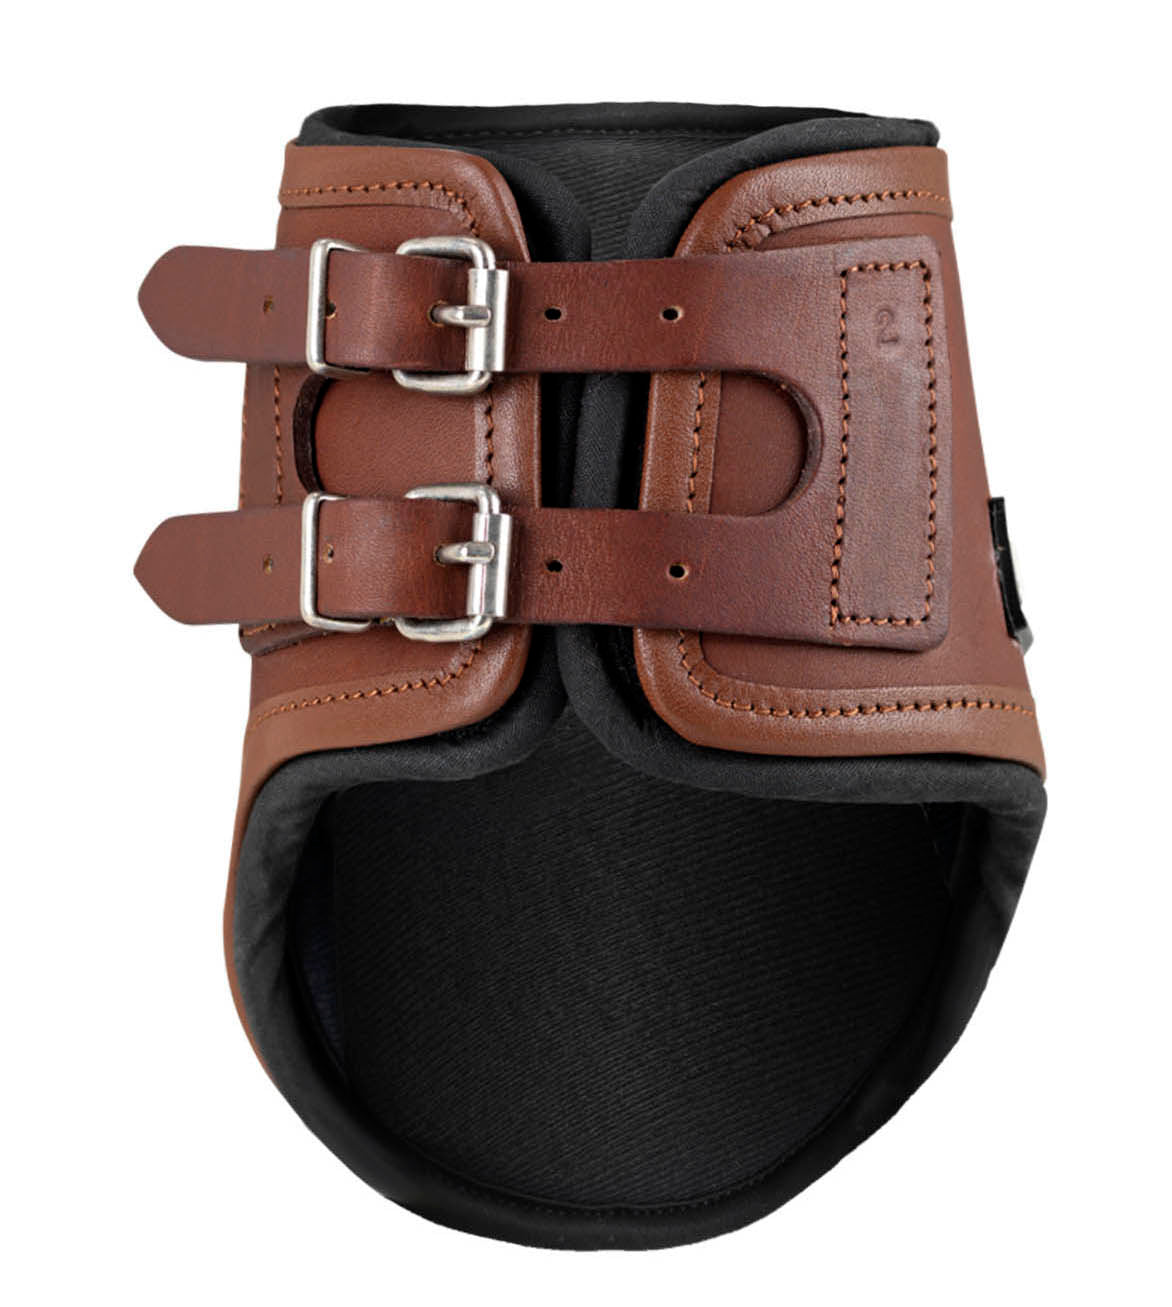 EquiFit T-Boot Luxe Hind